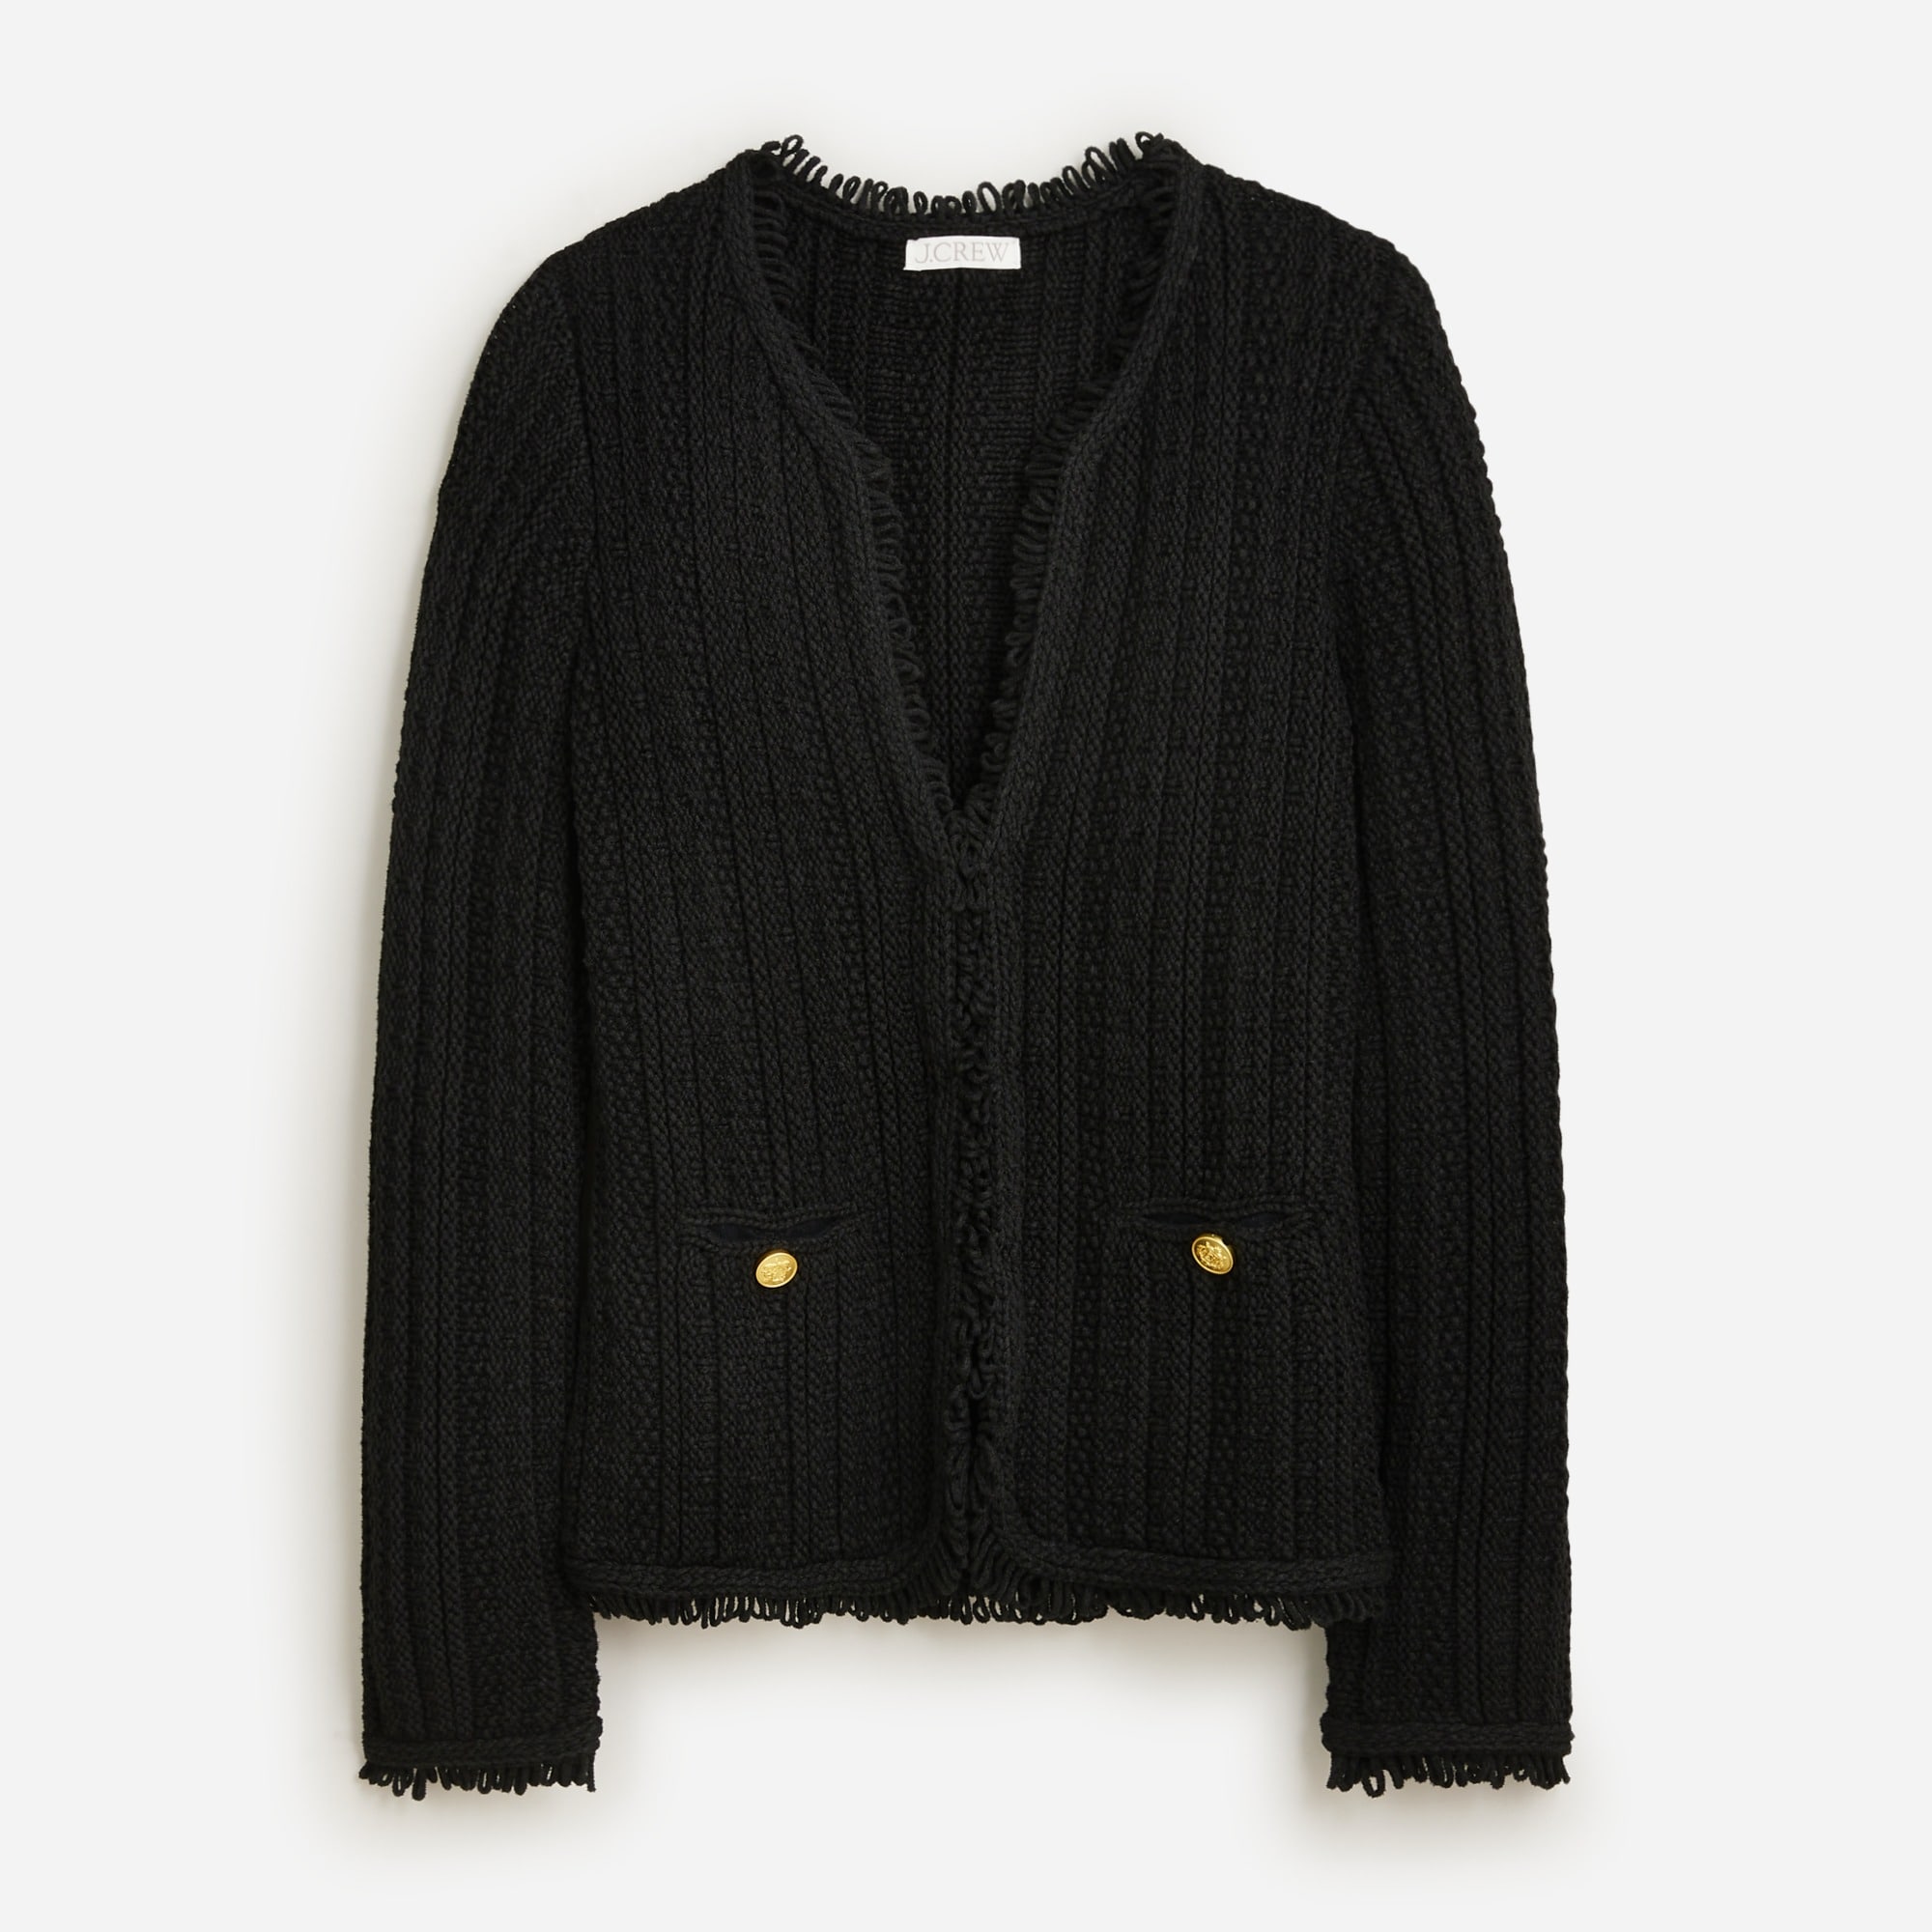 J.Crew: Textured Cable-knit Lady Jacket With Fringe For Women